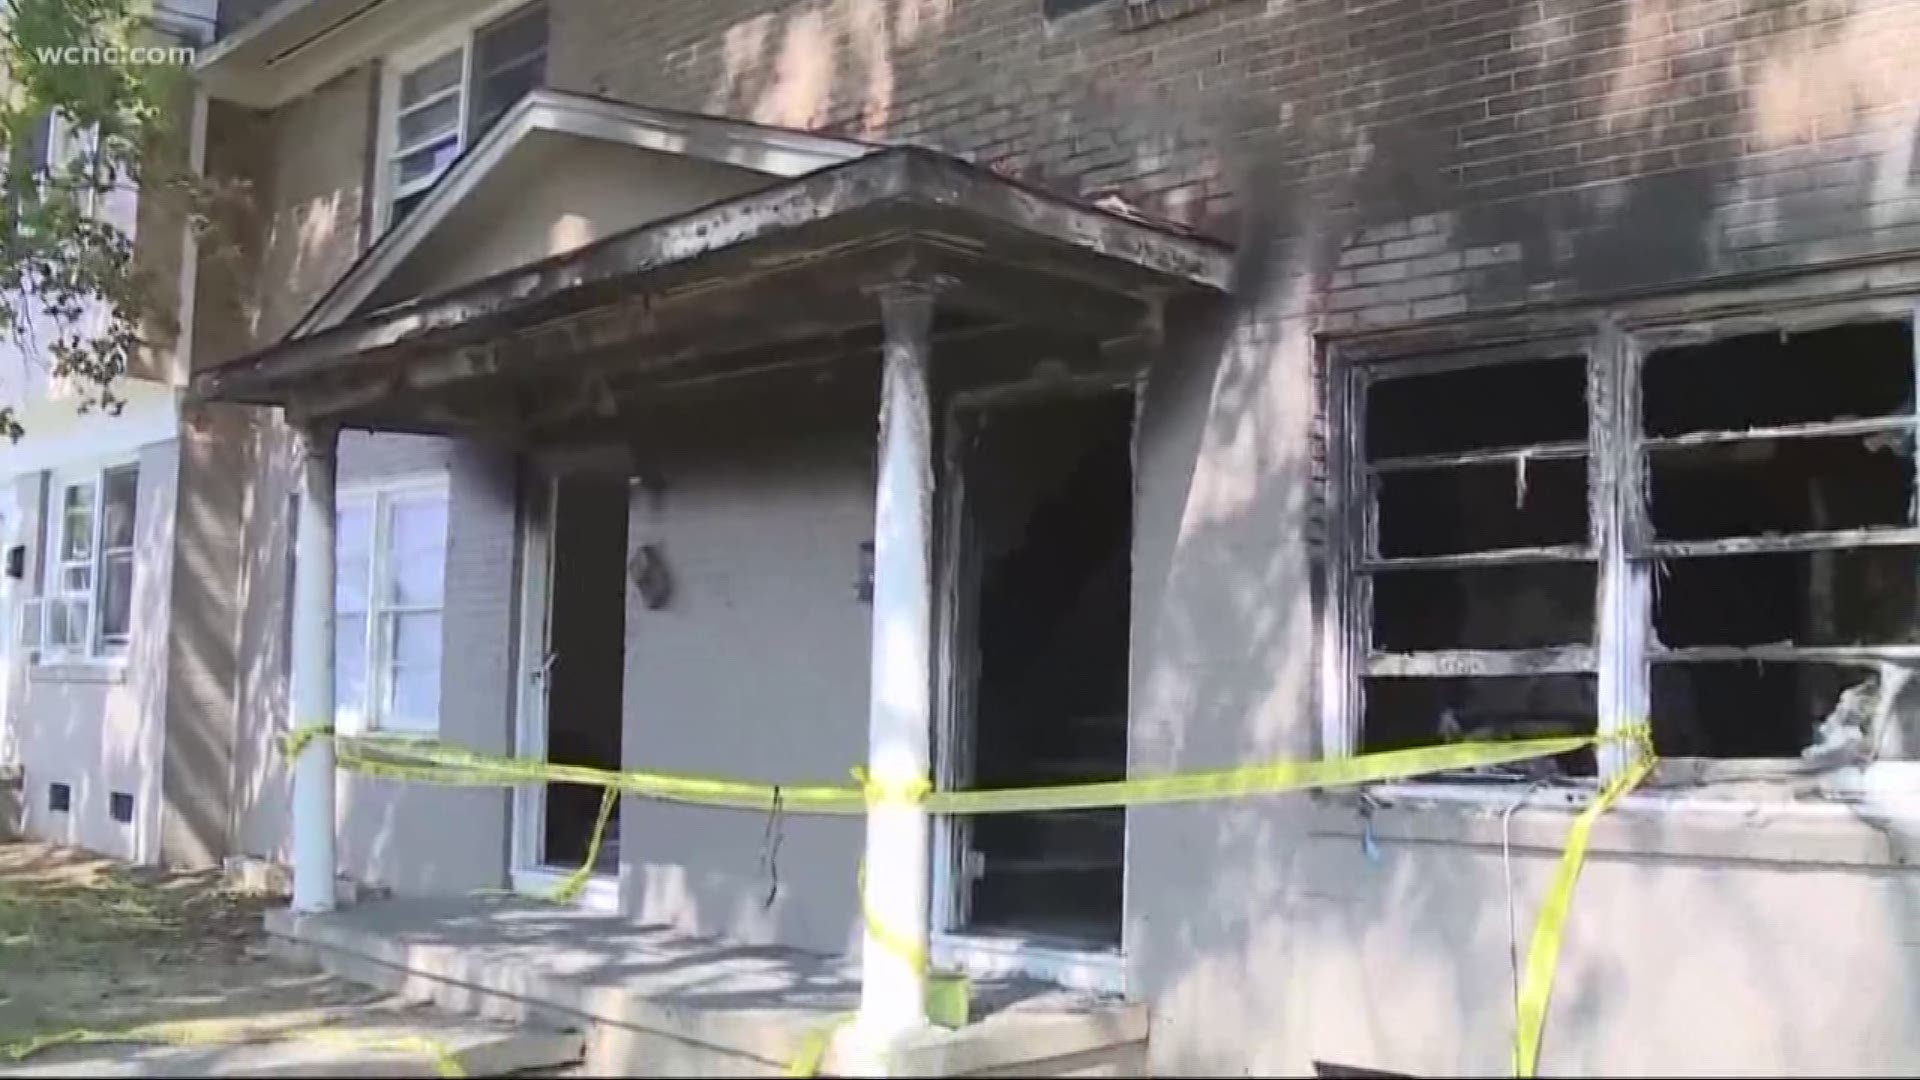 Five young children killed in apartment fire